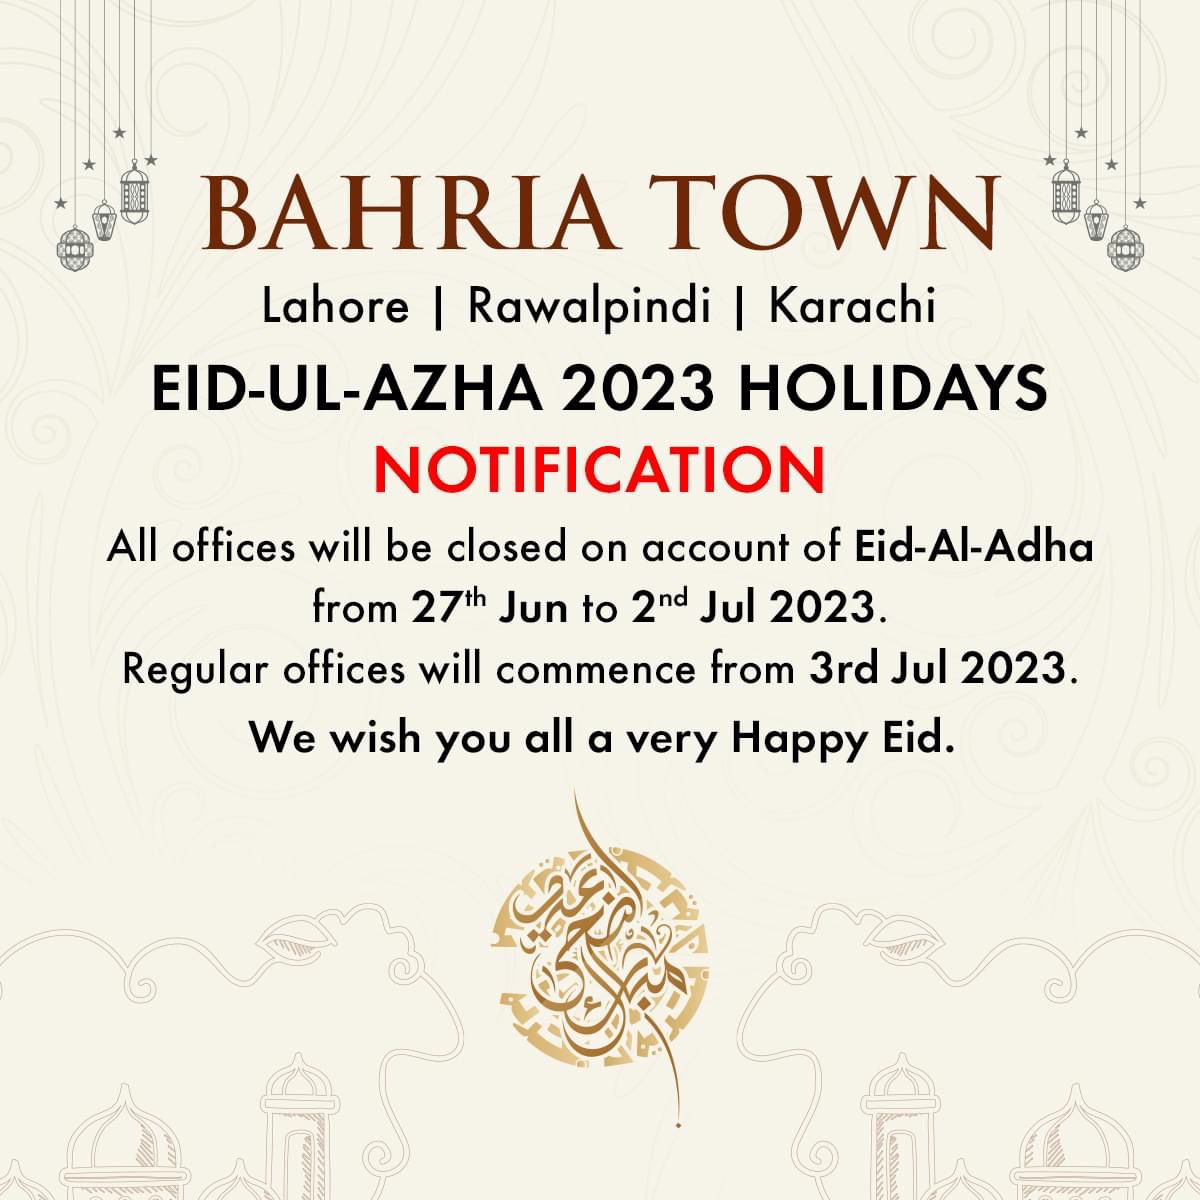 Bahria Town Announces Eid-ul-Adha Holidays for Lahore, Rawalpindi, and ...